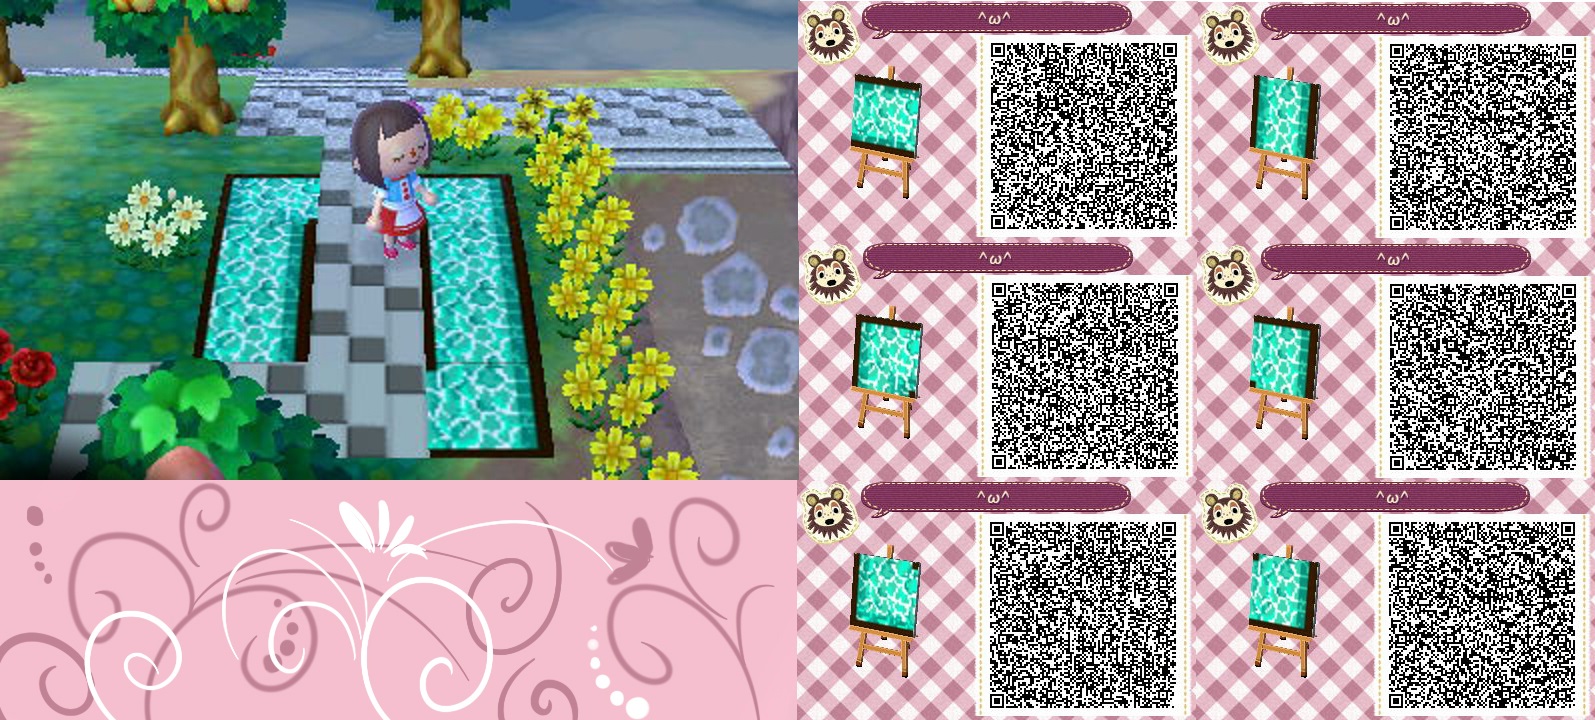 Top Acnl Qr Codes Pokemon Image For